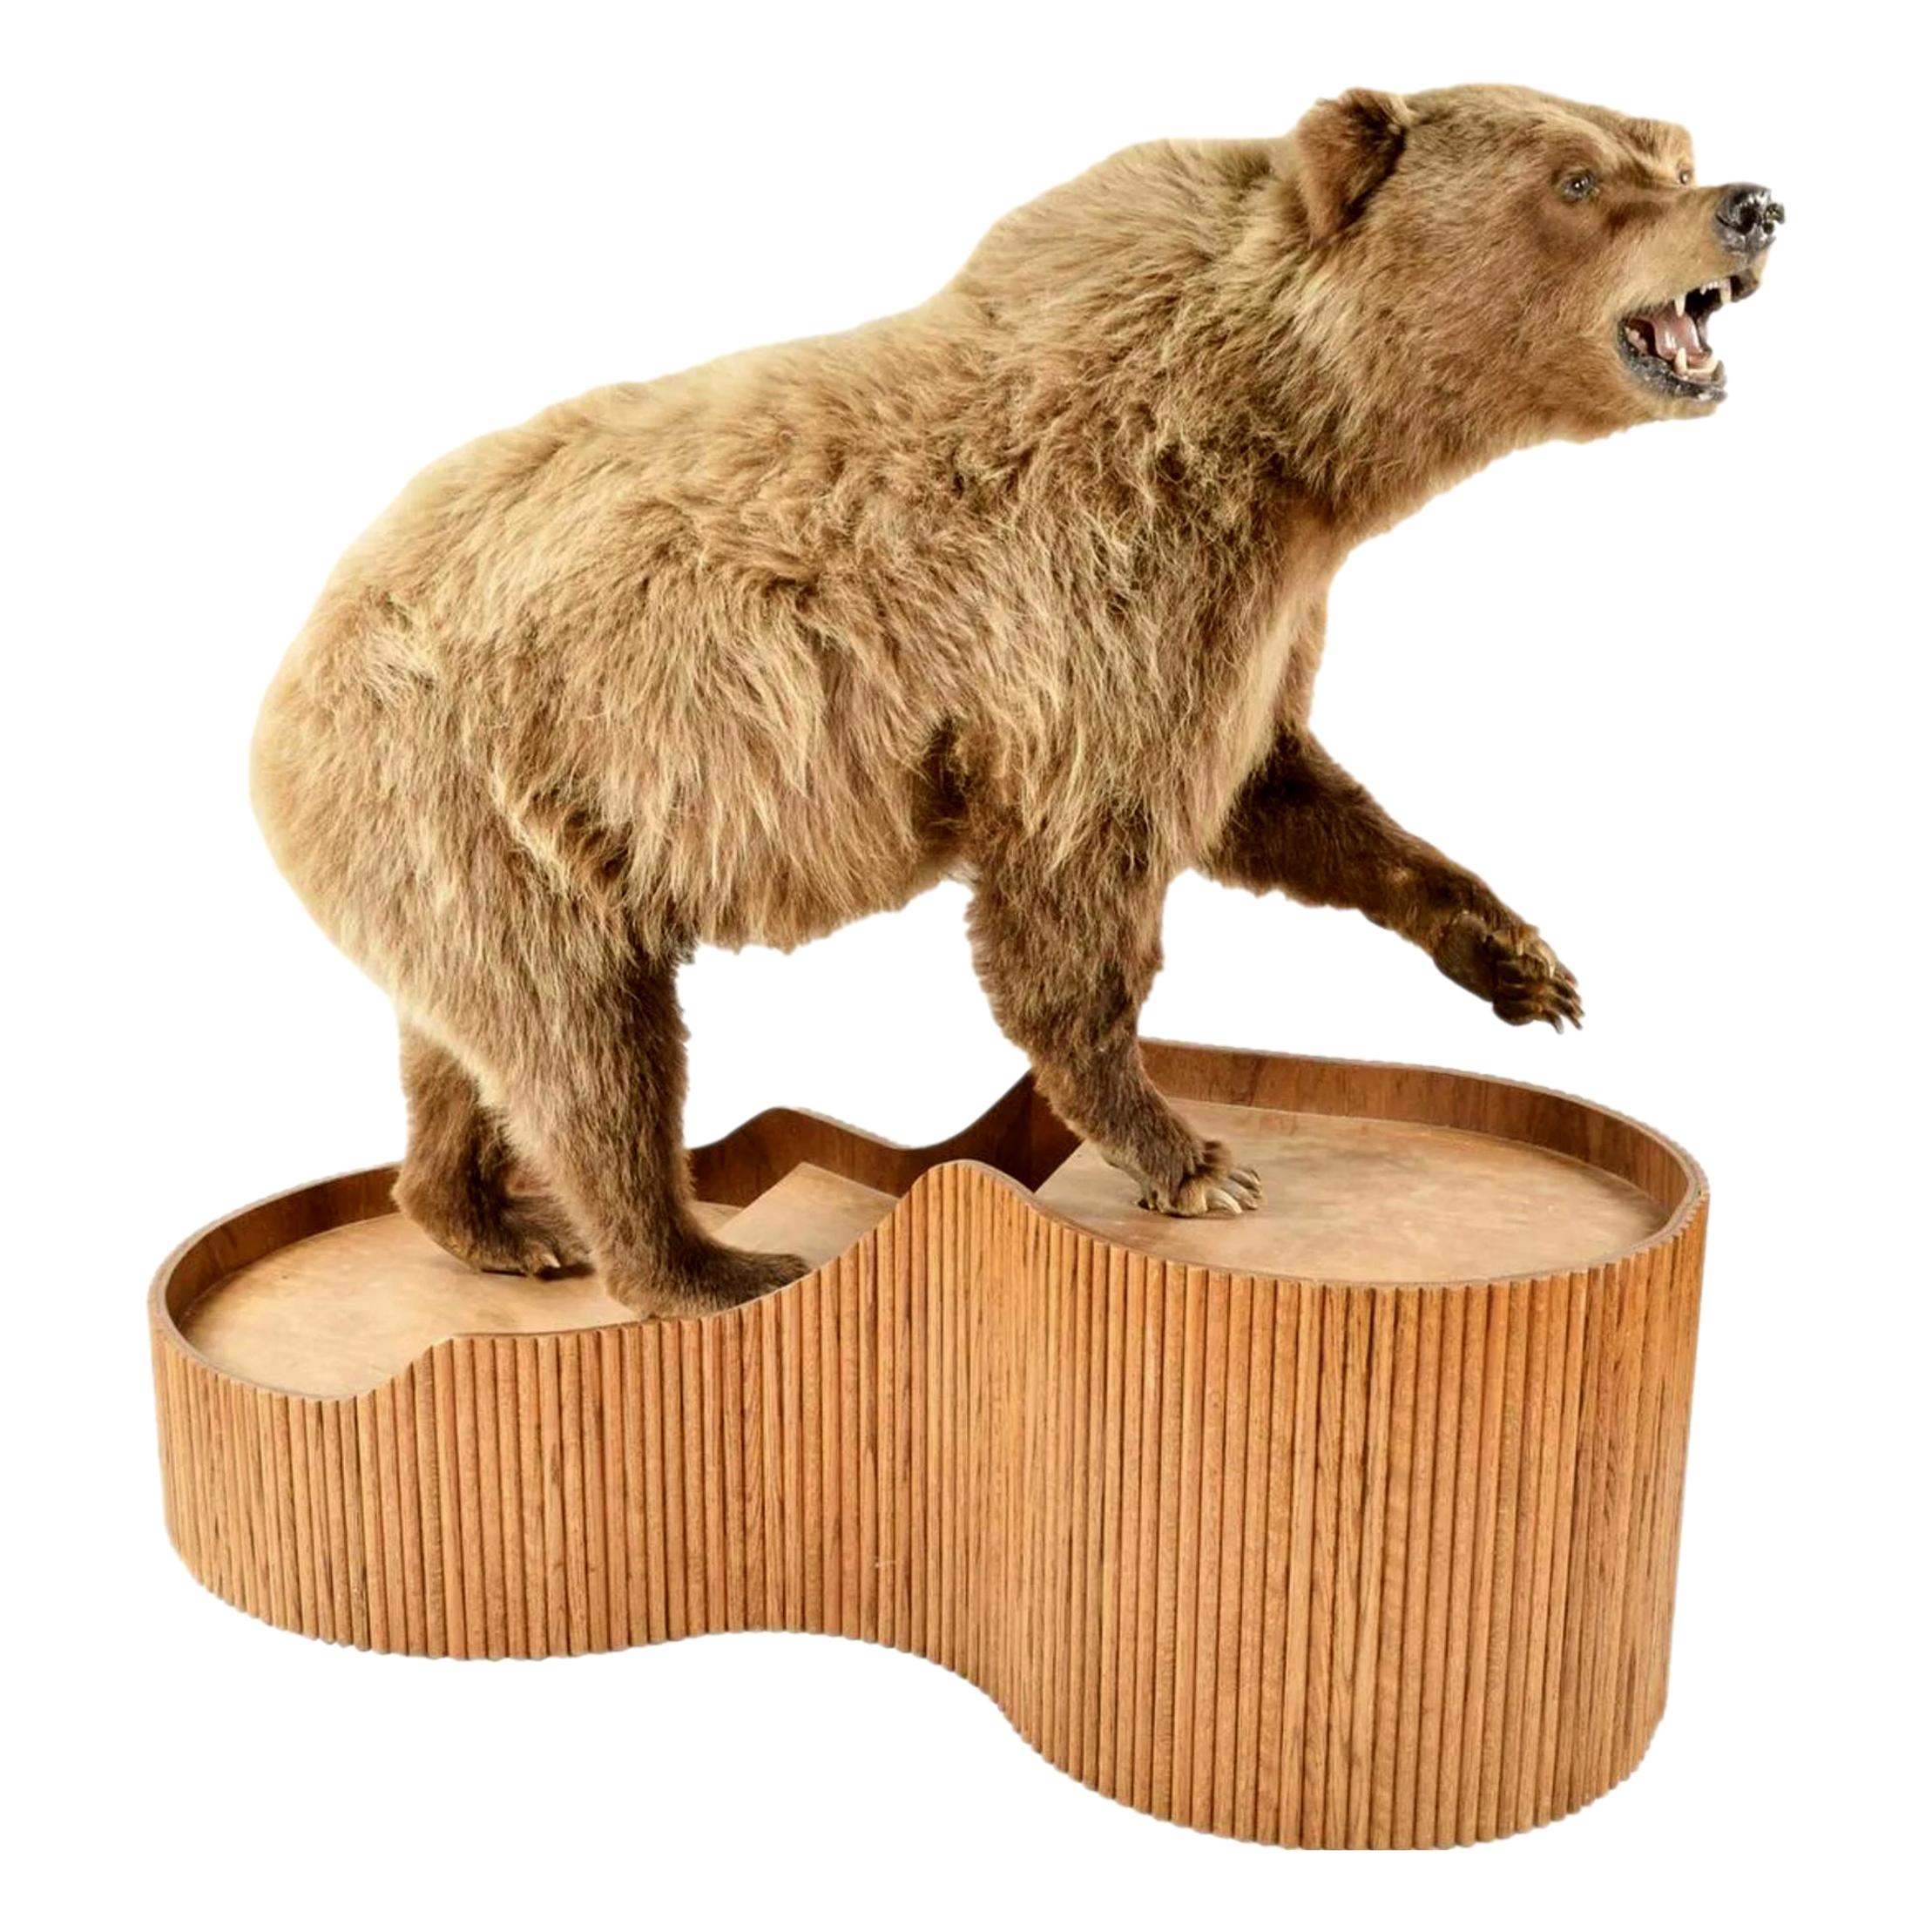 Brown Bear Taxidermy on Stand